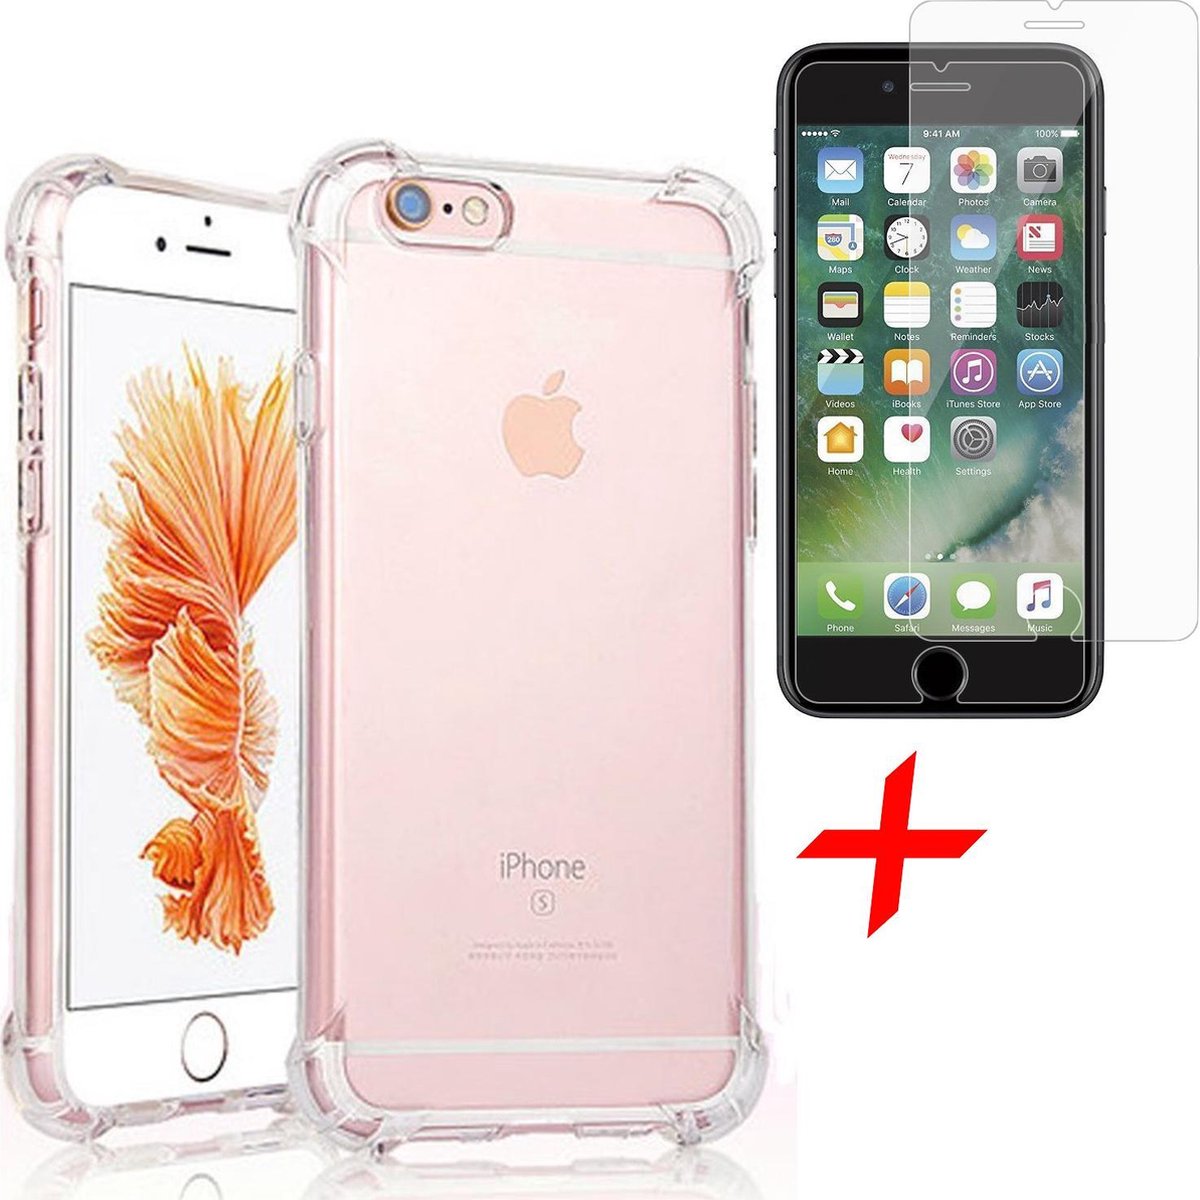 iPhone Plus / 6 Plus Hoesje - Proof Siliconen Back Cover Case Hoes Transparant - Tempered Glass Screenprotector